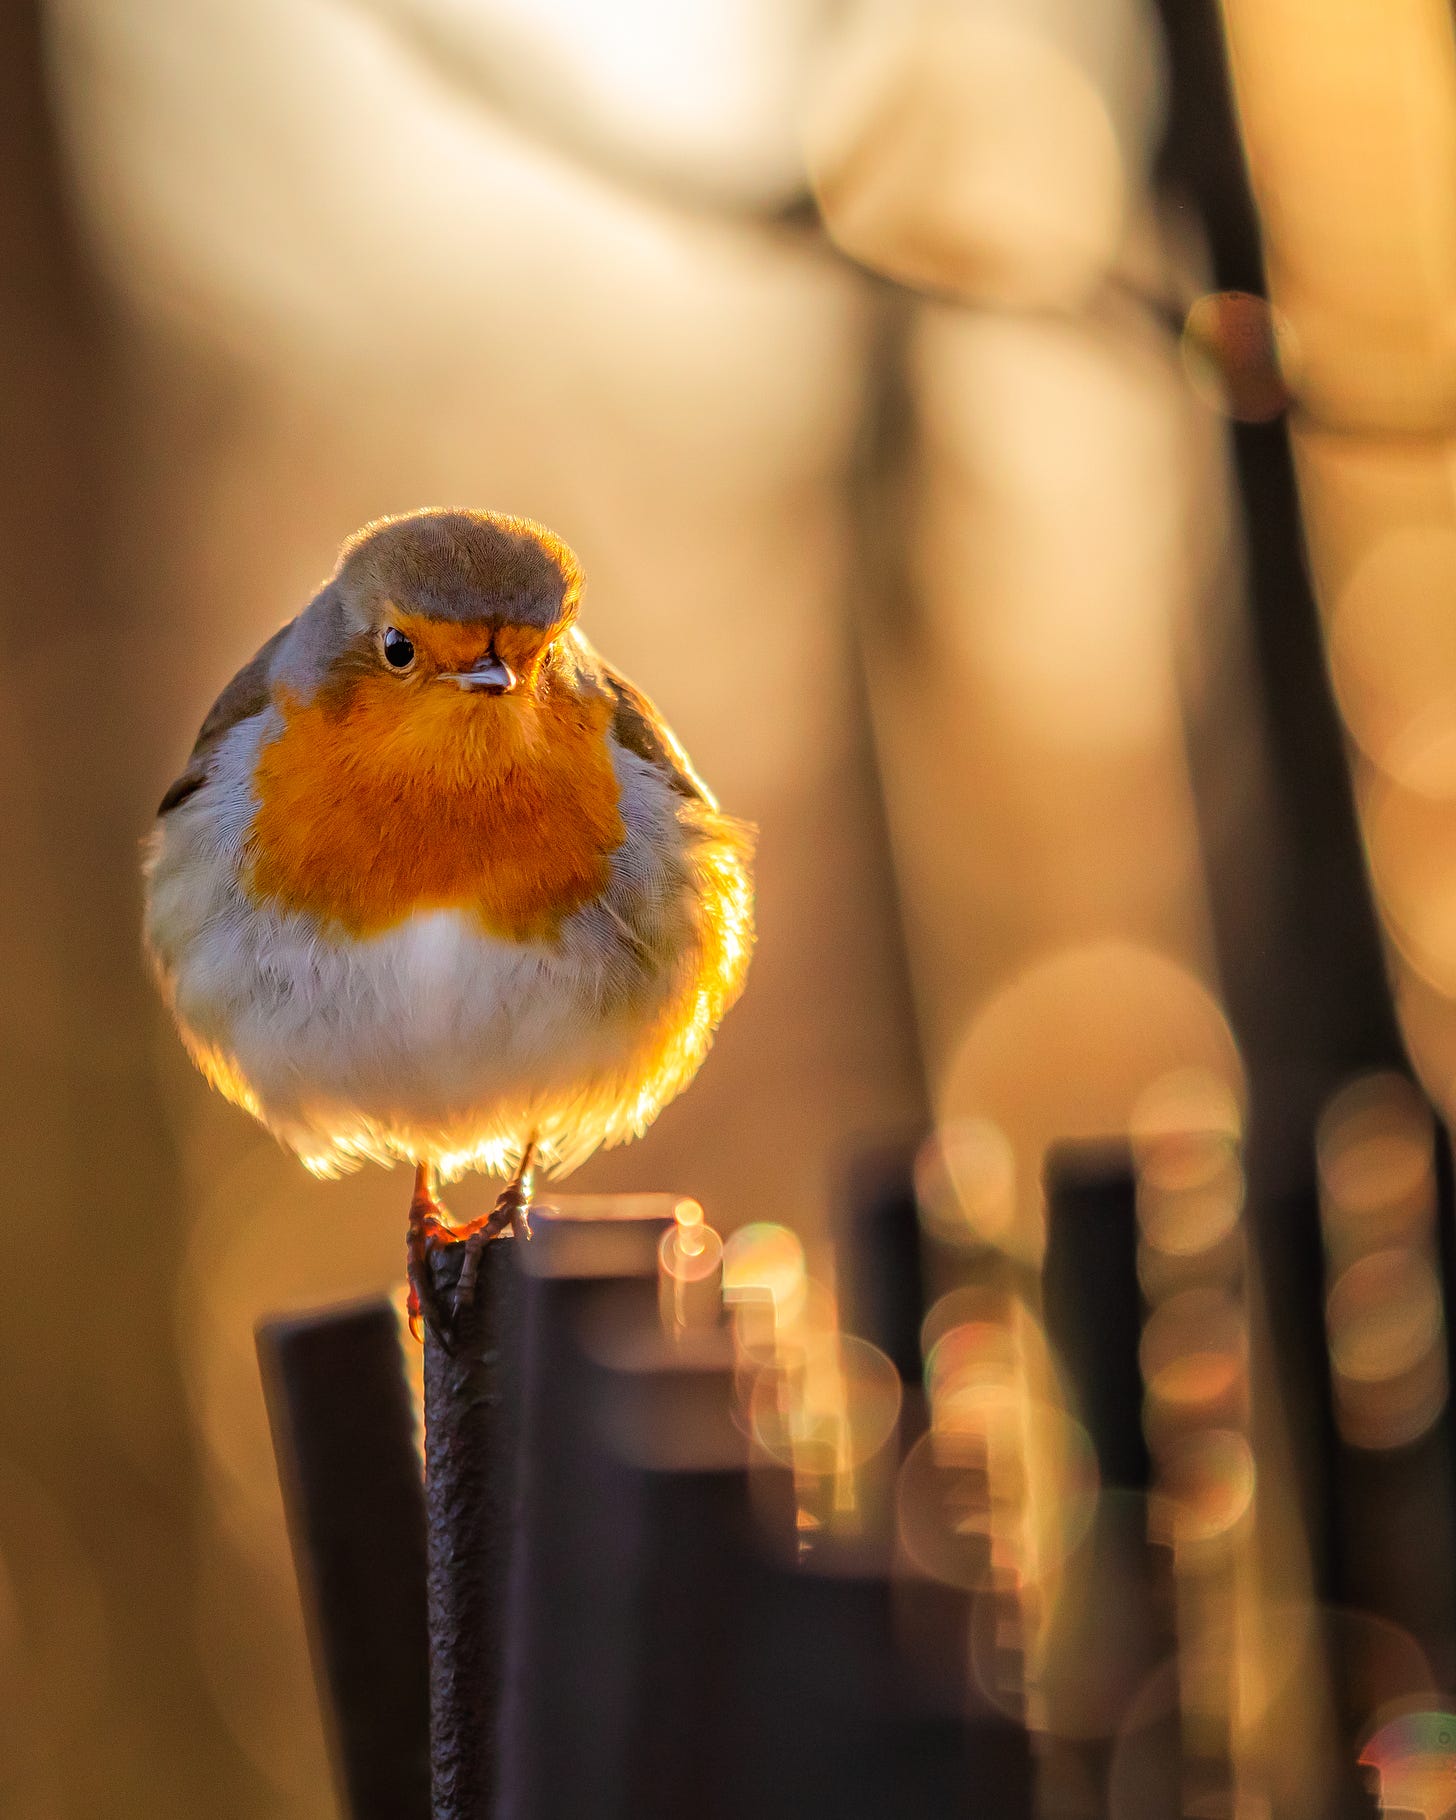 Robin stands on a metal fence, backlit by the rising winter sun